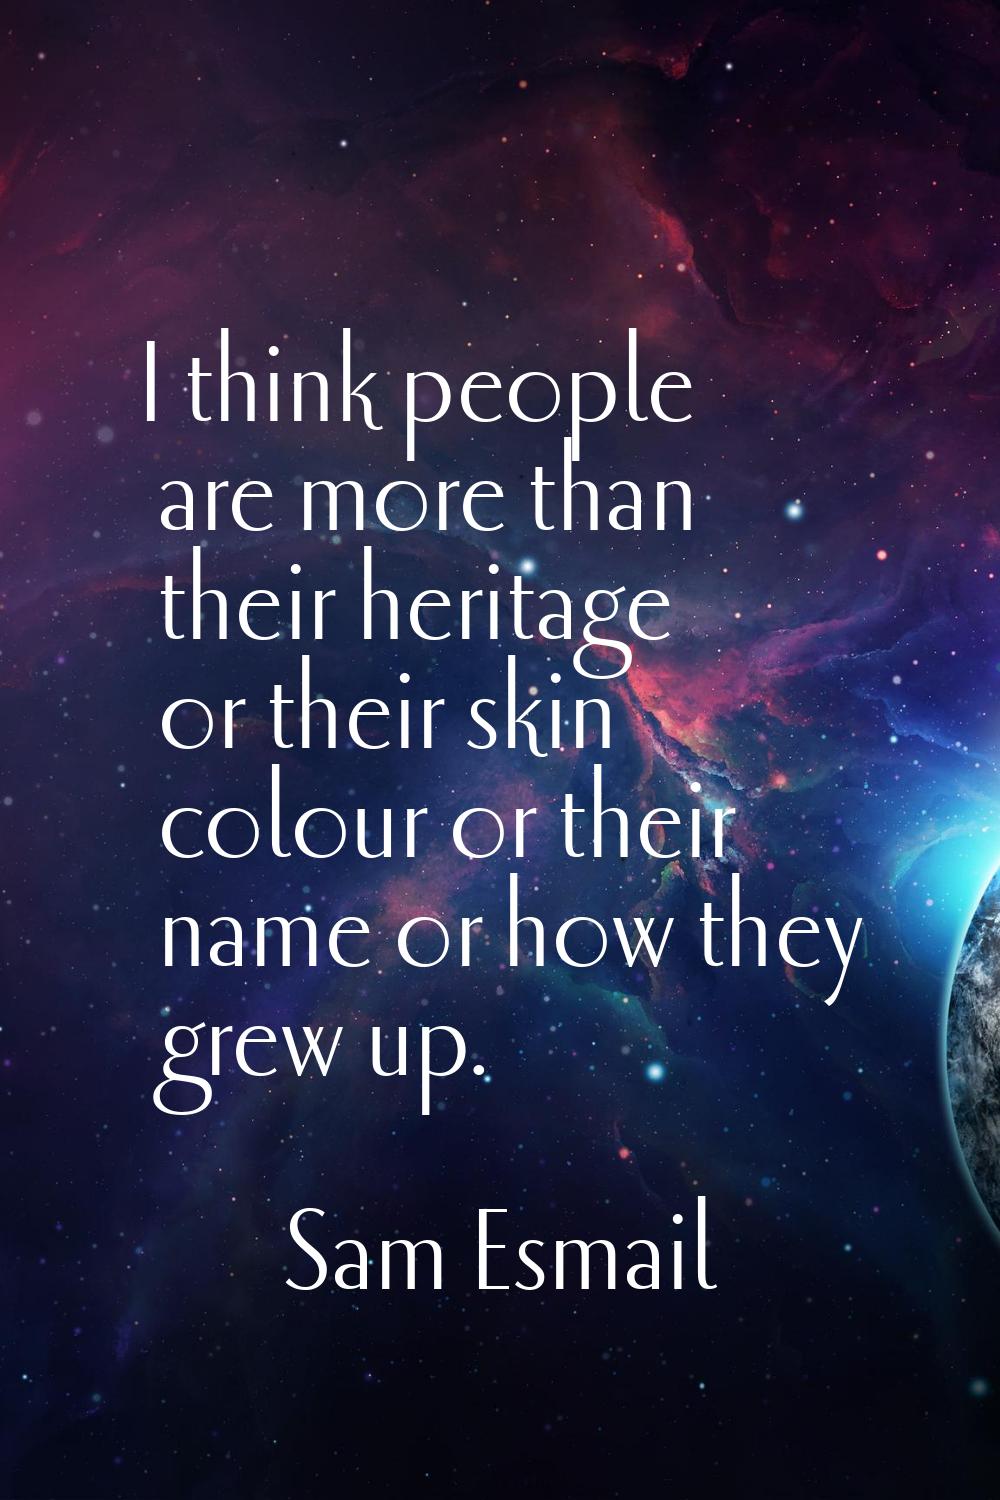 I think people are more than their heritage or their skin colour or their name or how they grew up.